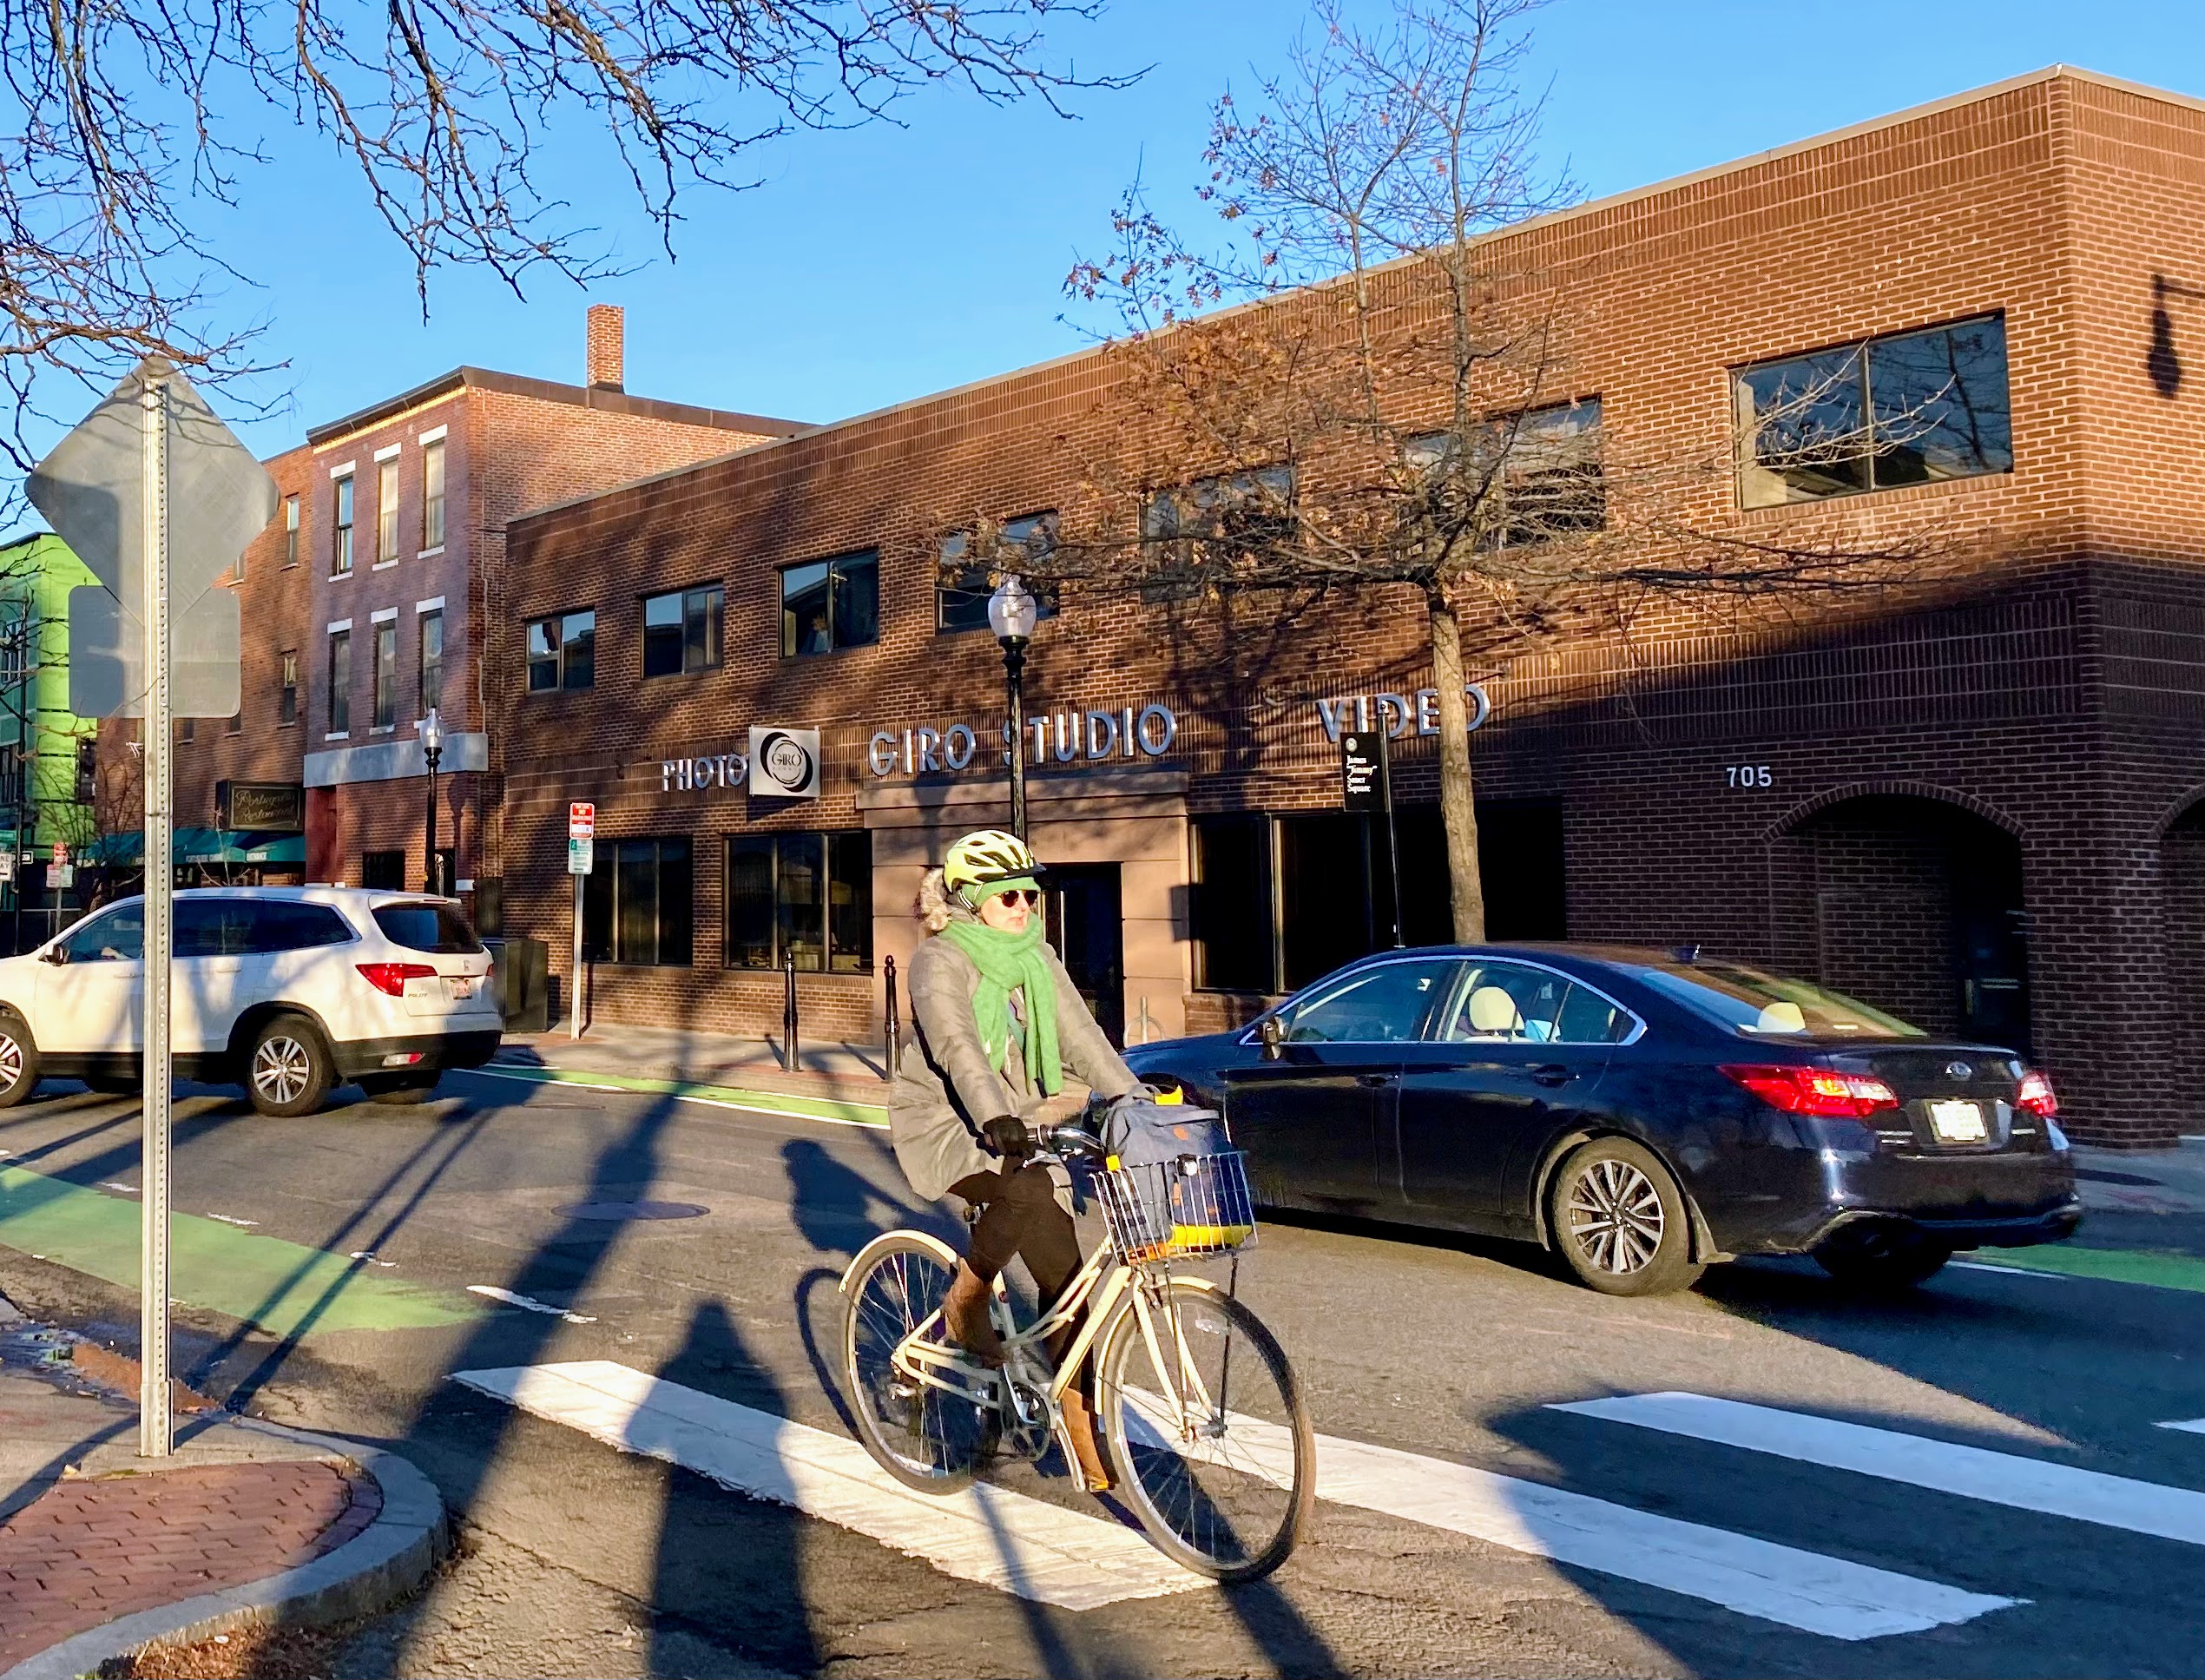 A bicyclist wearing a green scarf and a gray coat bikes down a bike lane next to cars.